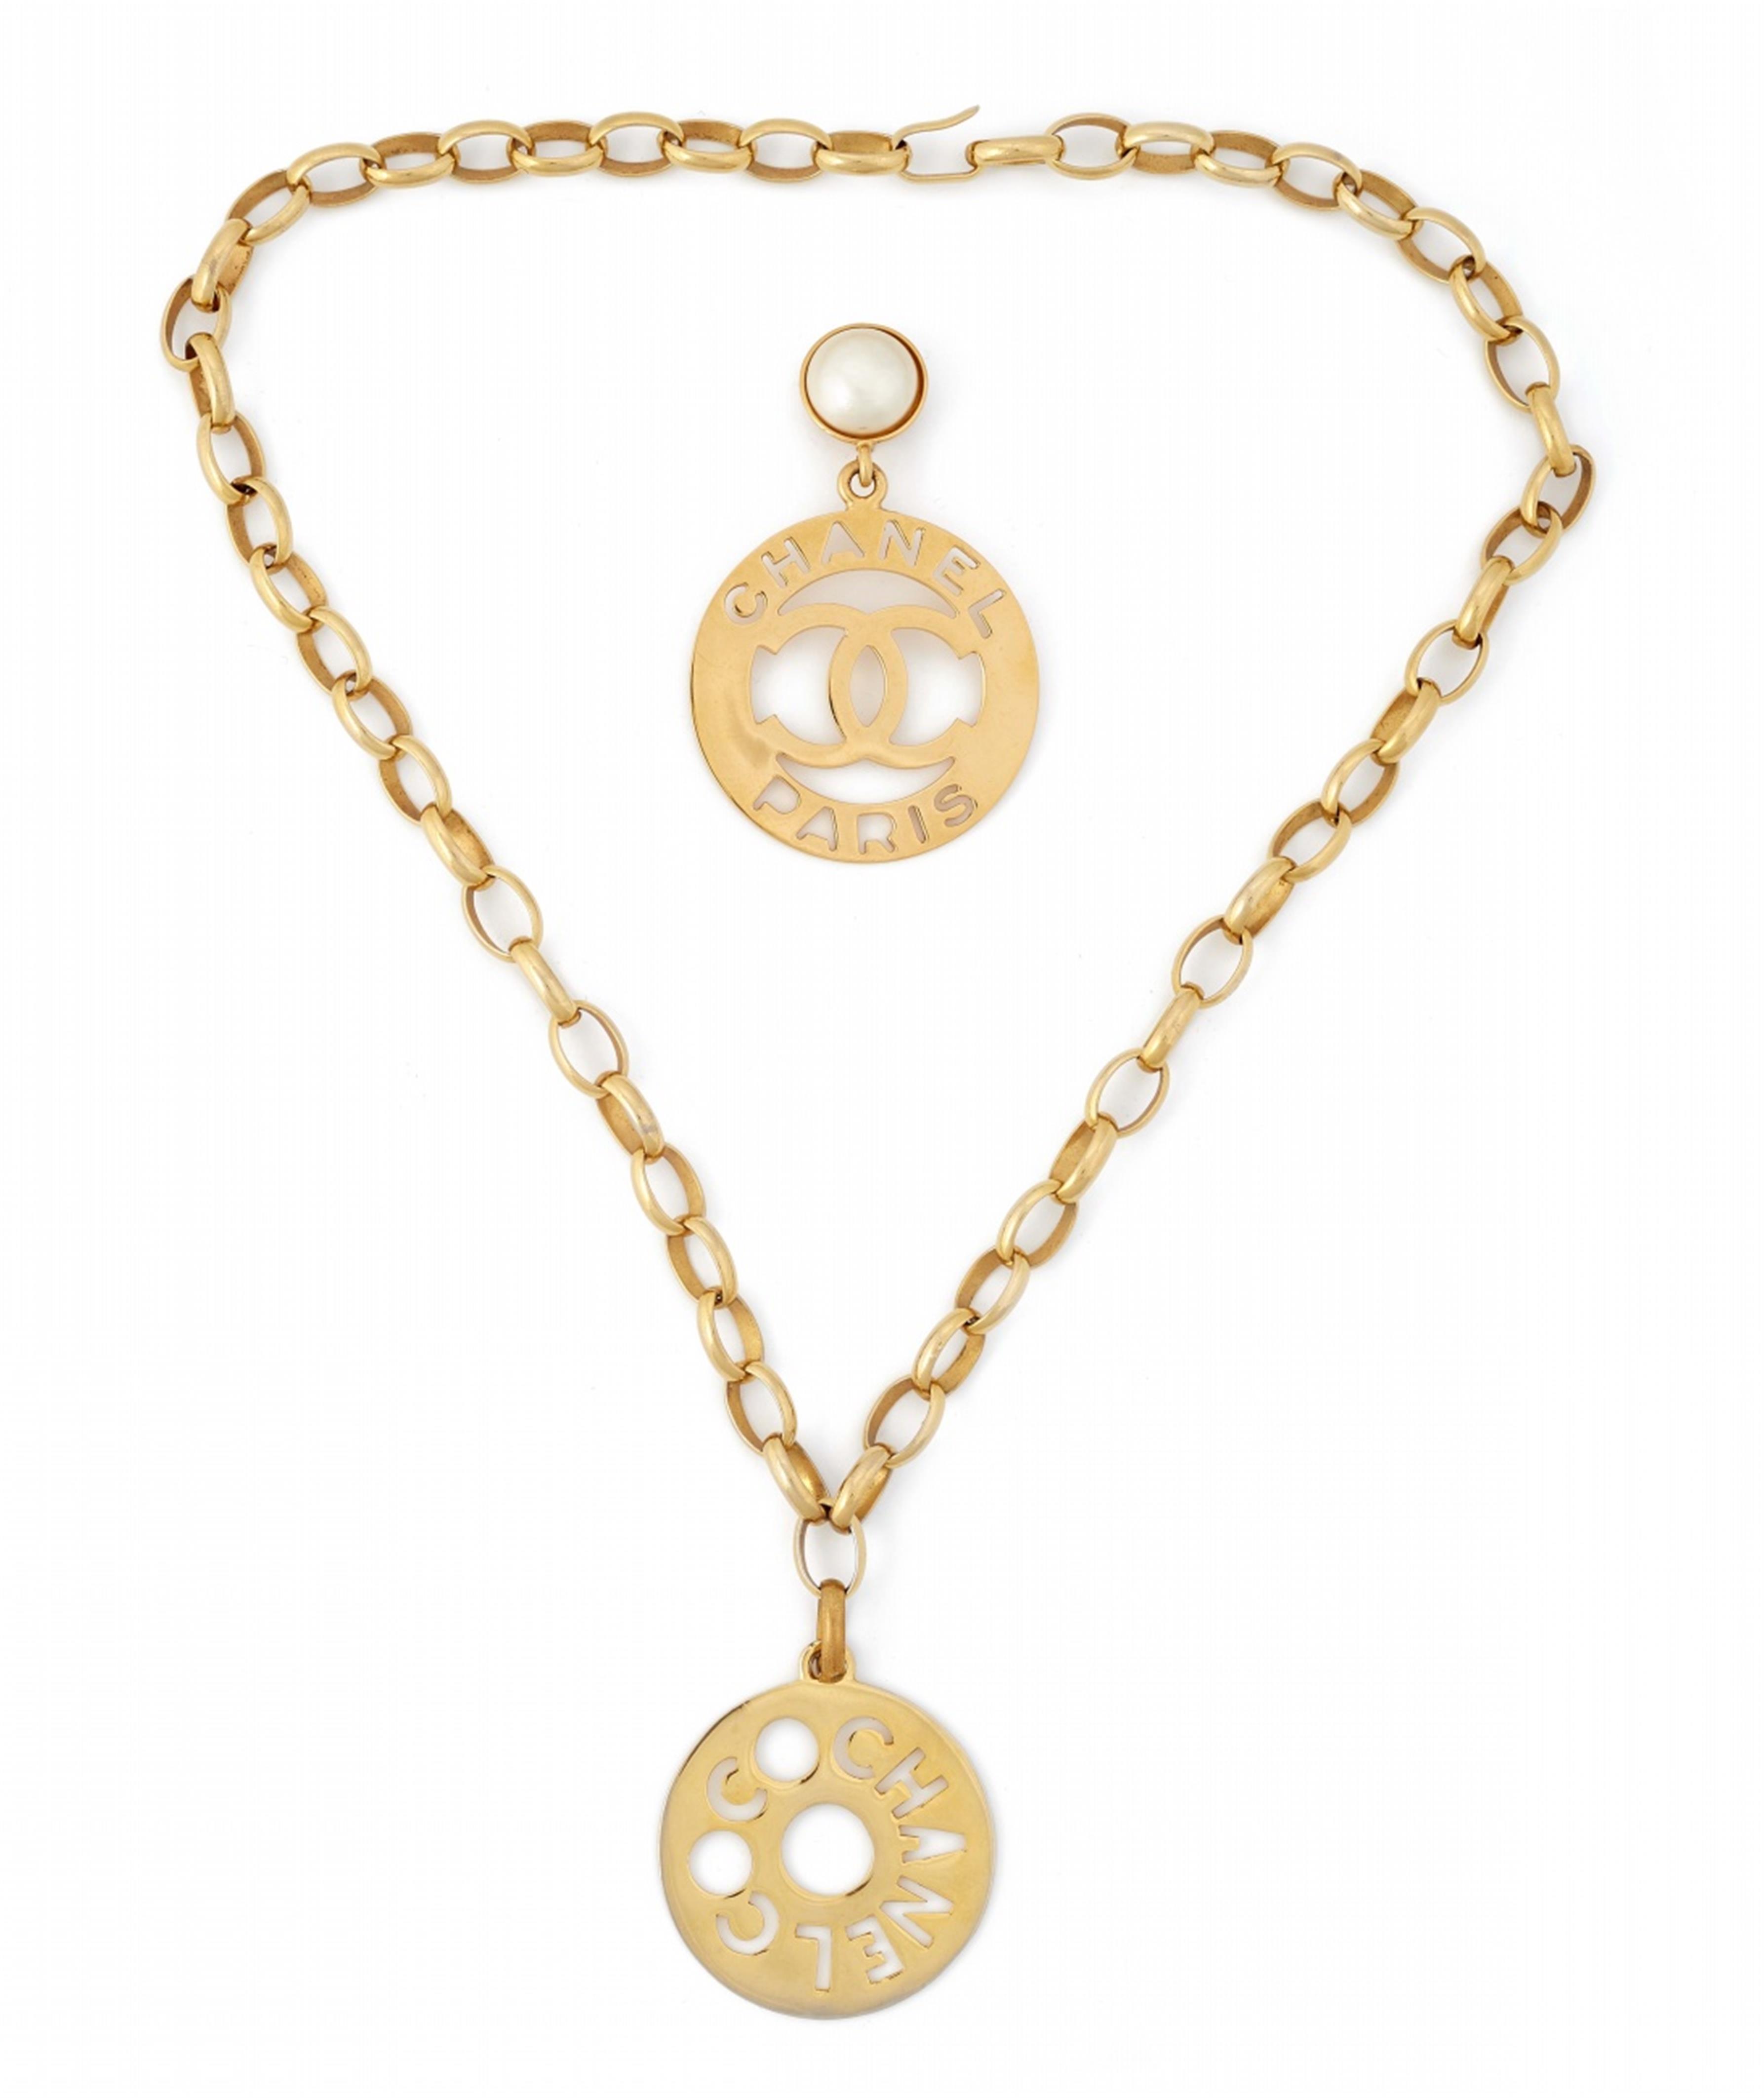 A Chanel logo pendant necklace and earring, 1983 - image-1